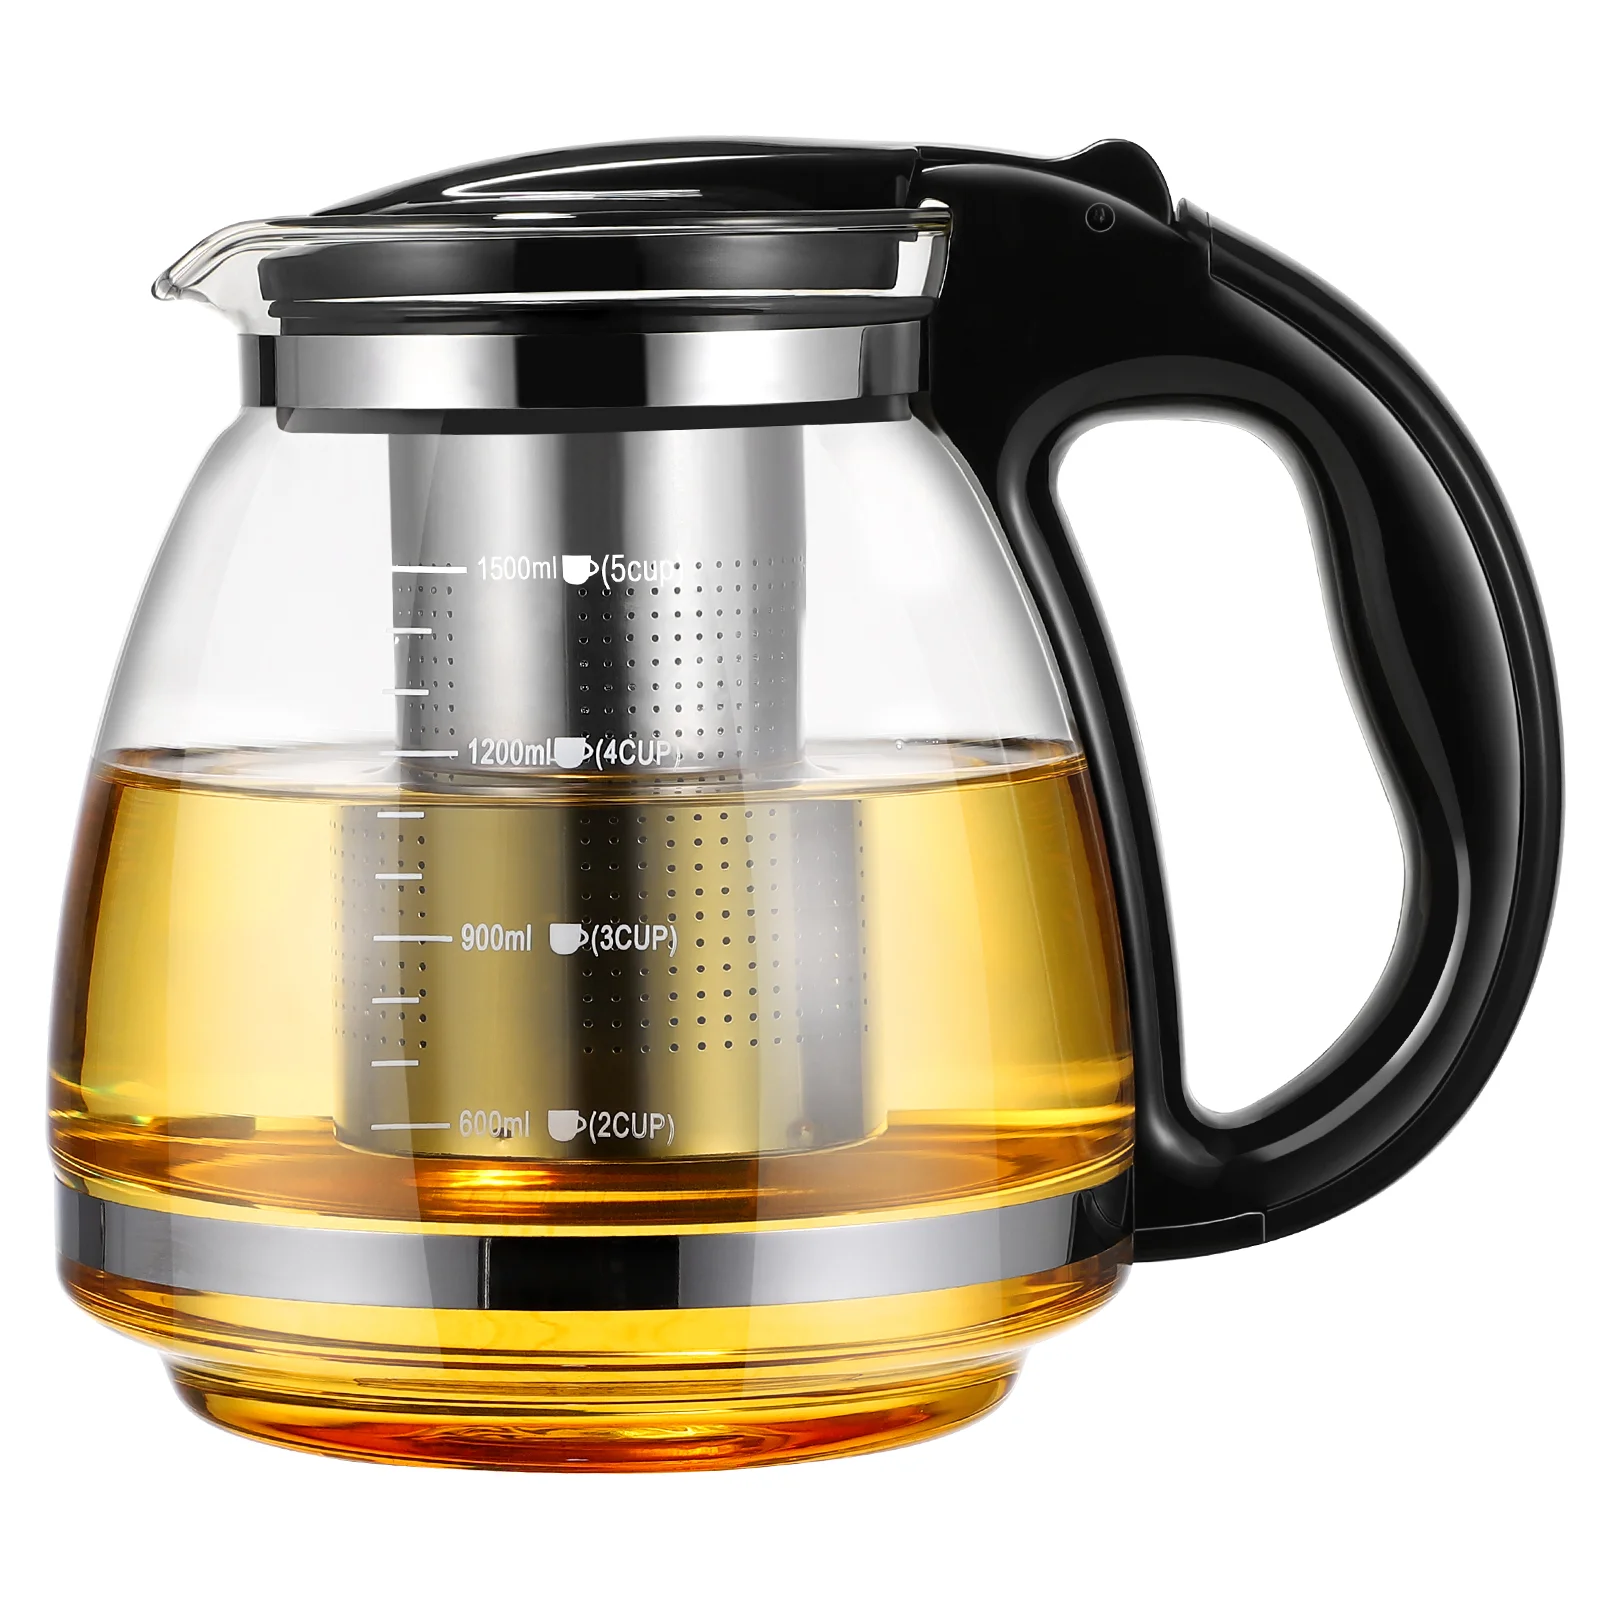 

Stainless Steel Water Pitcher Stovetop Safe Teapot Kettle Glass Kungfu Teaware Strainer Coffee and tableware